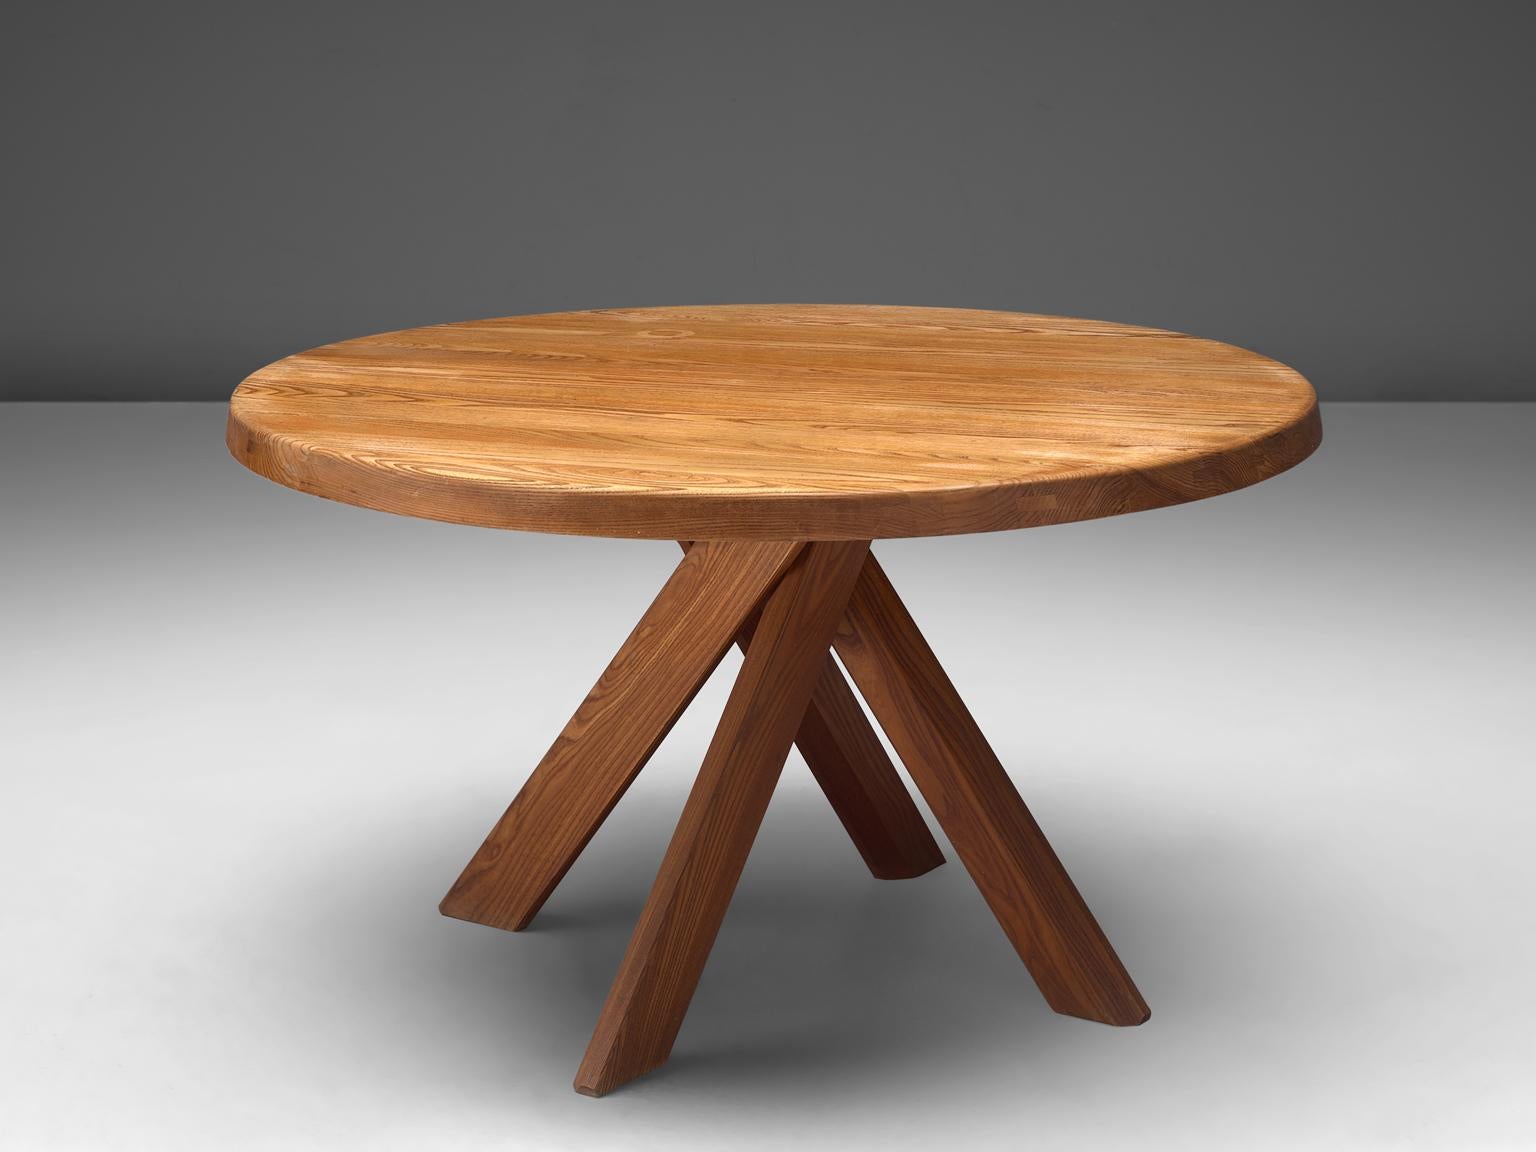 Pierre Chapo, dining table T21C Sfax, elm, France, circa 1973.

This T21C table of Pierre Chapo is in a good patinated condition. The shape of the base creates a very open look and makes this an object to make a space more interesting. The